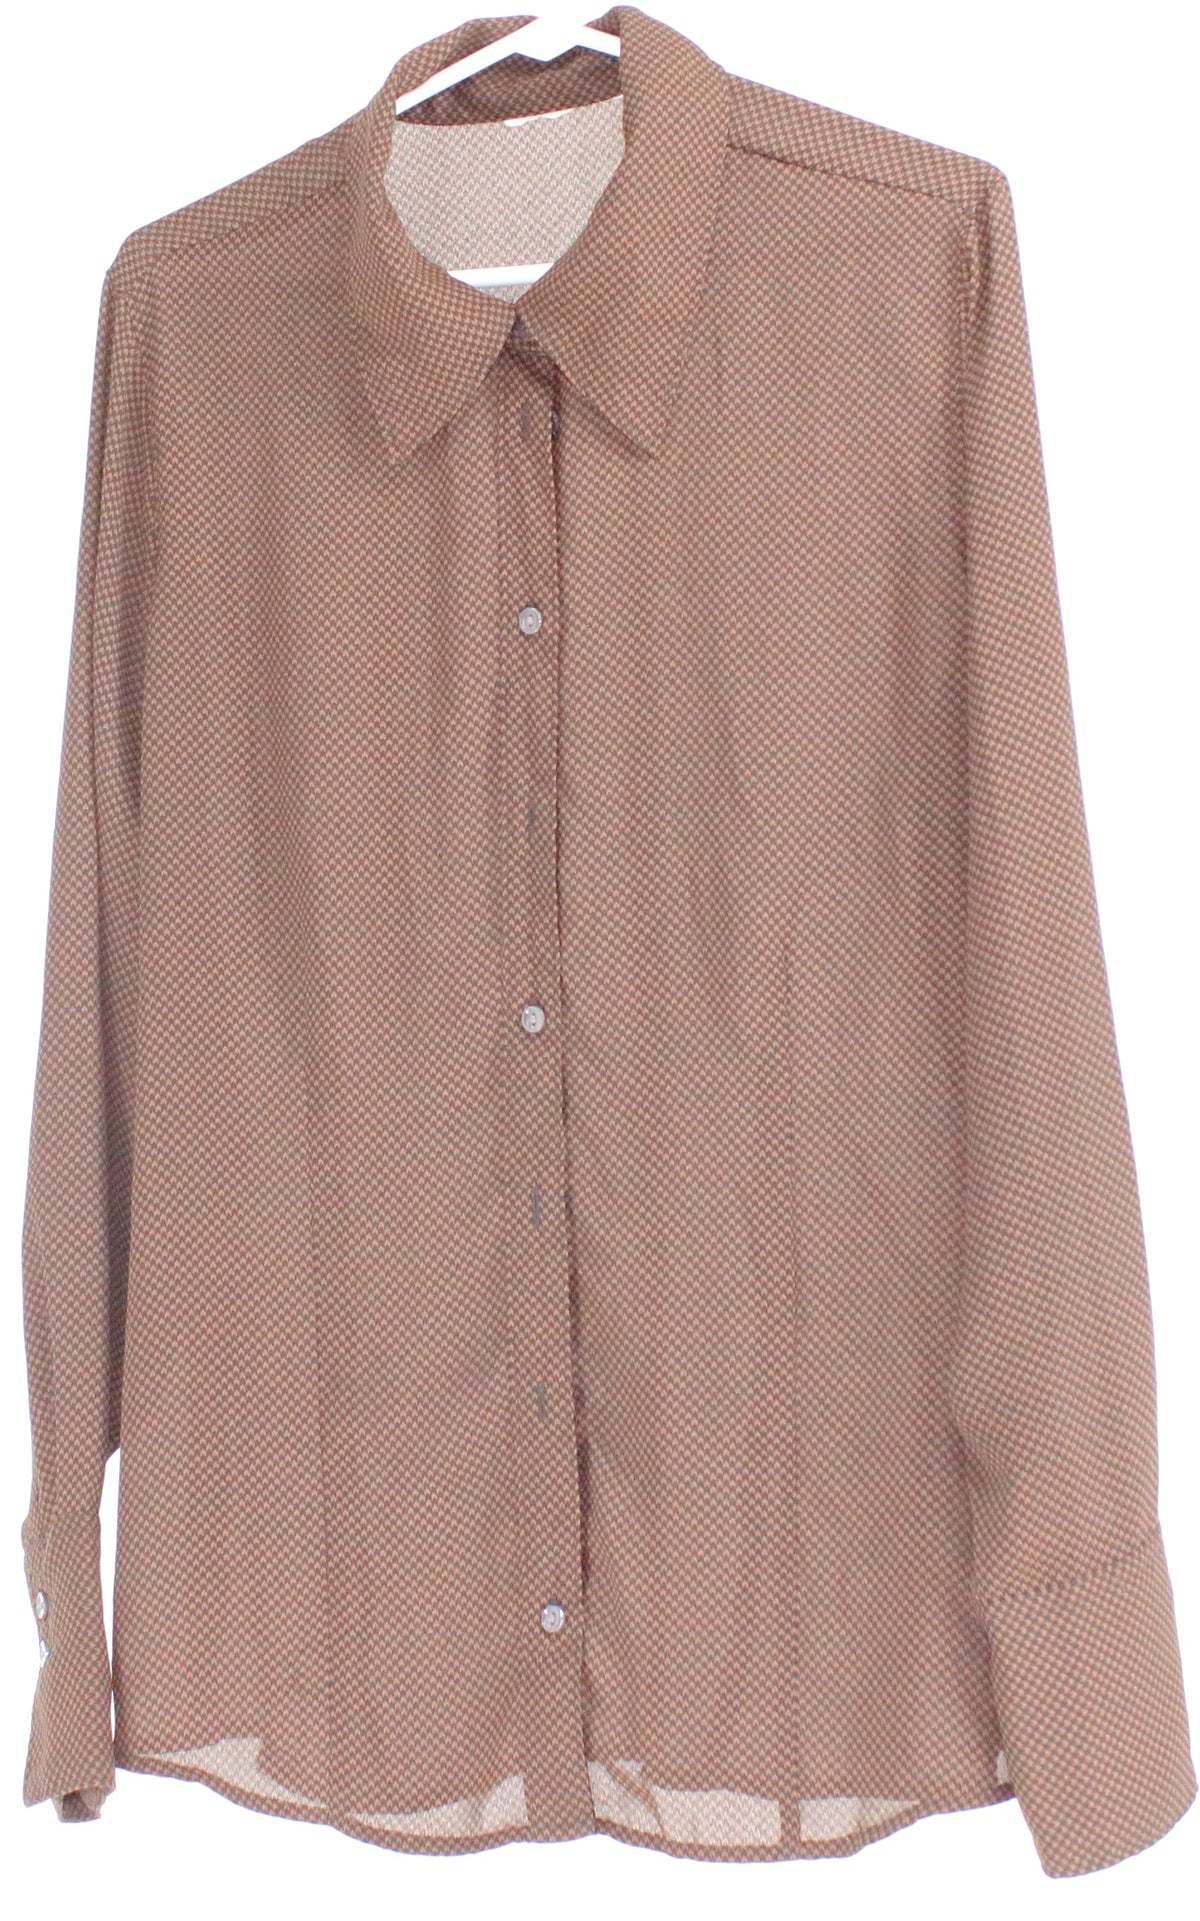 Brown & Black Printed Button-Up Blouse